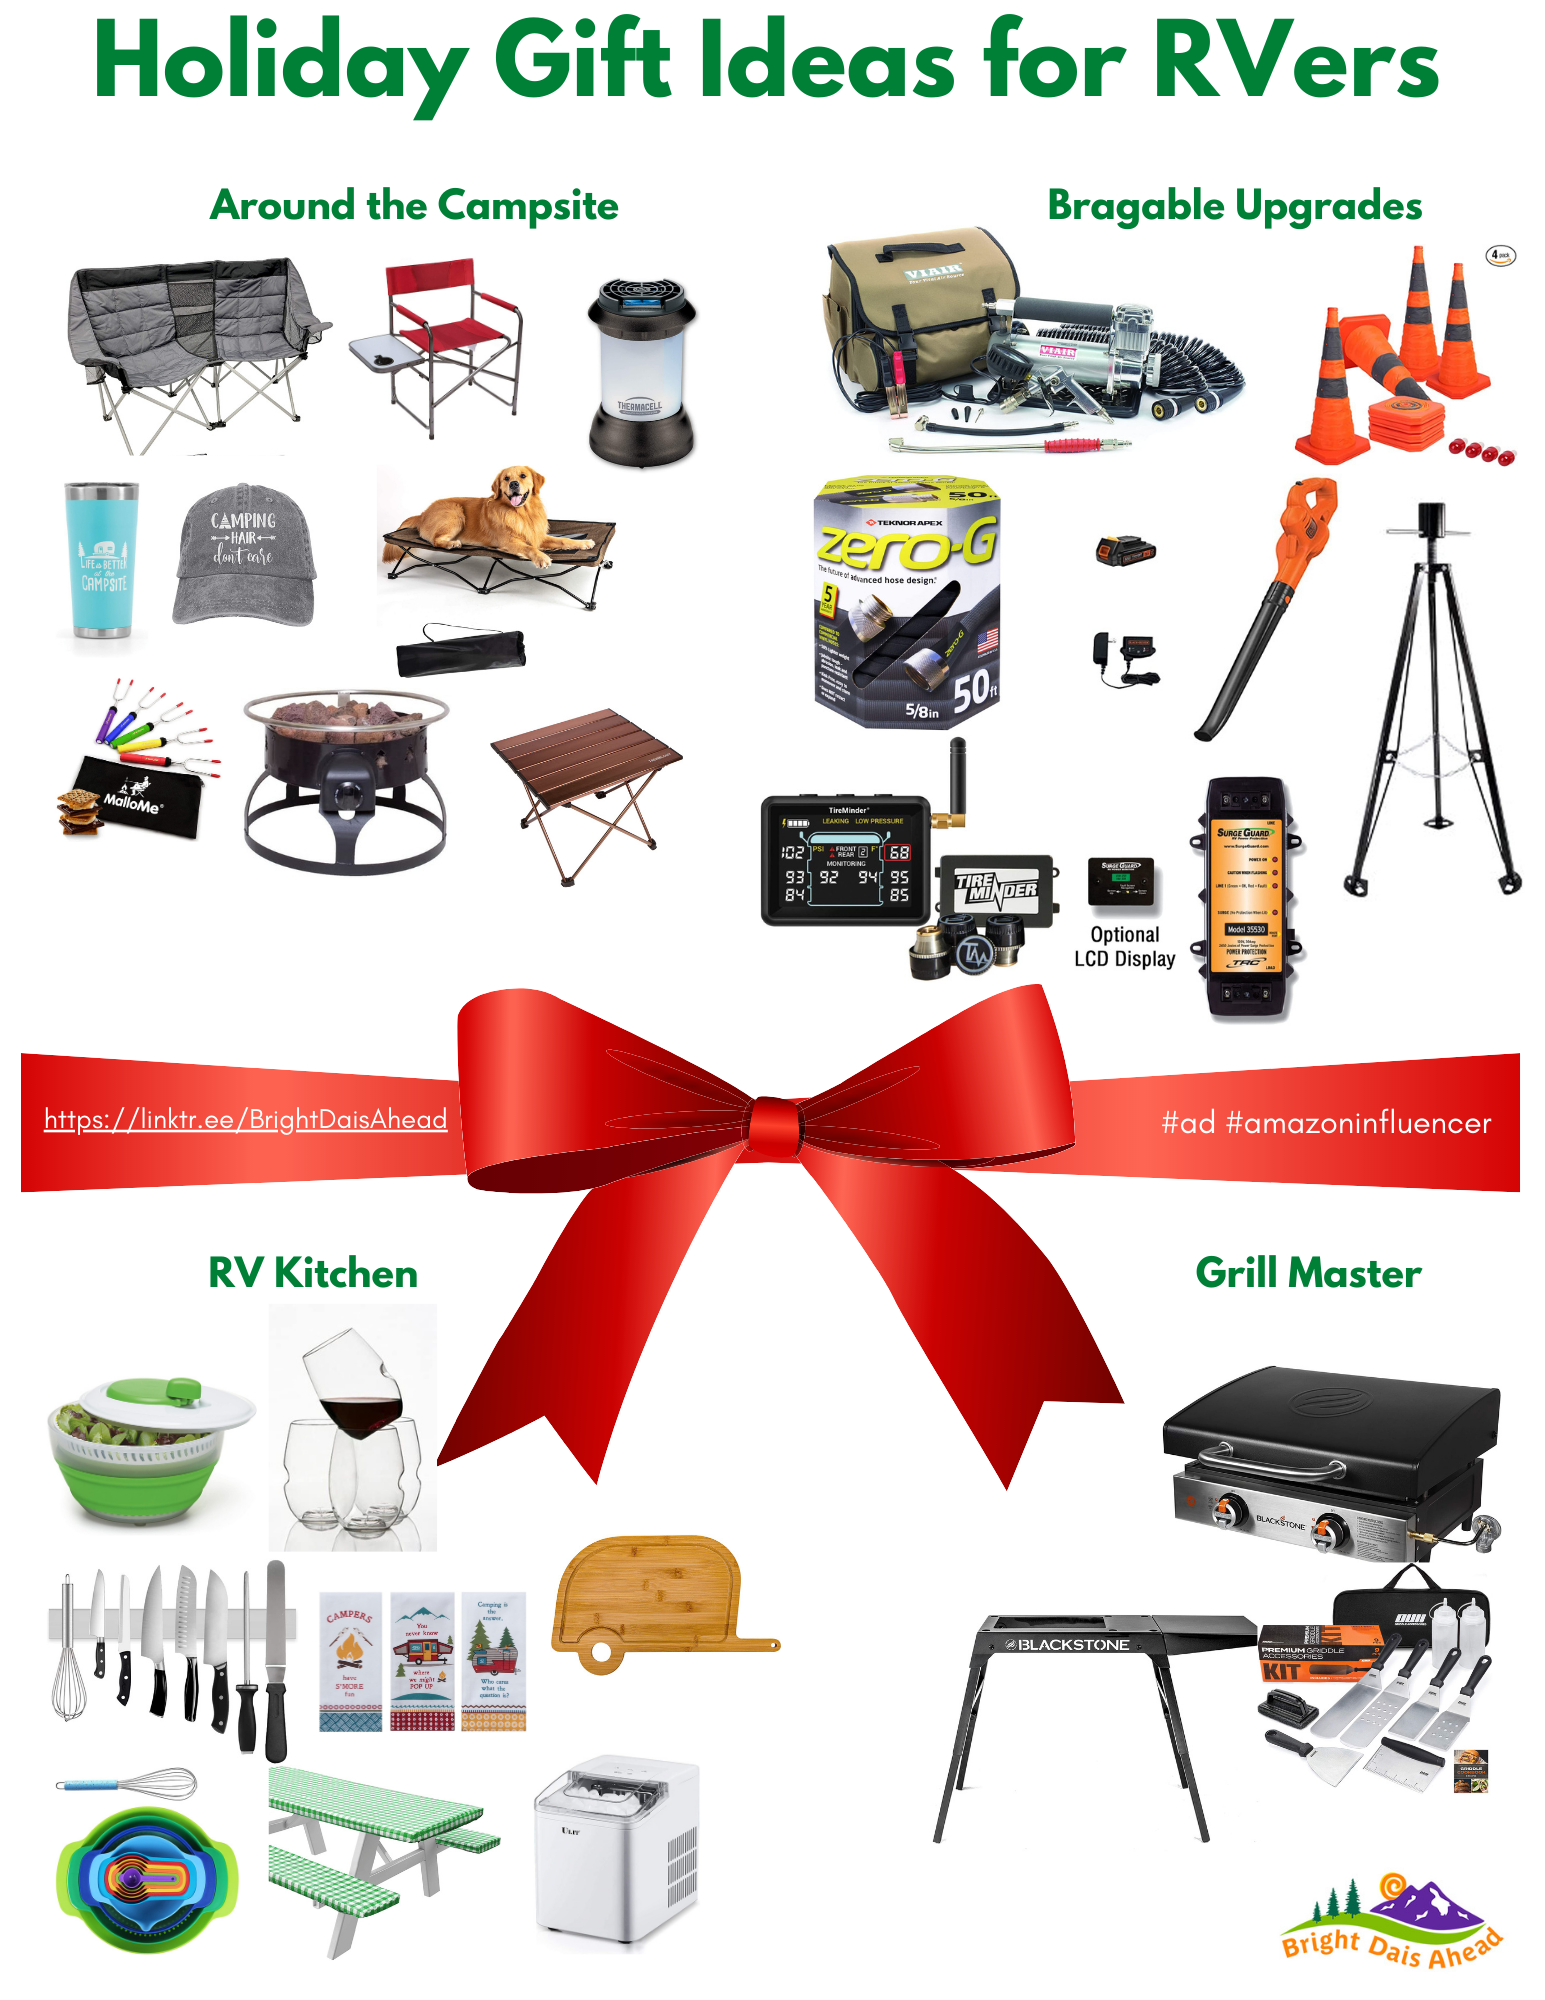 Holiday gift ideas for Rvers